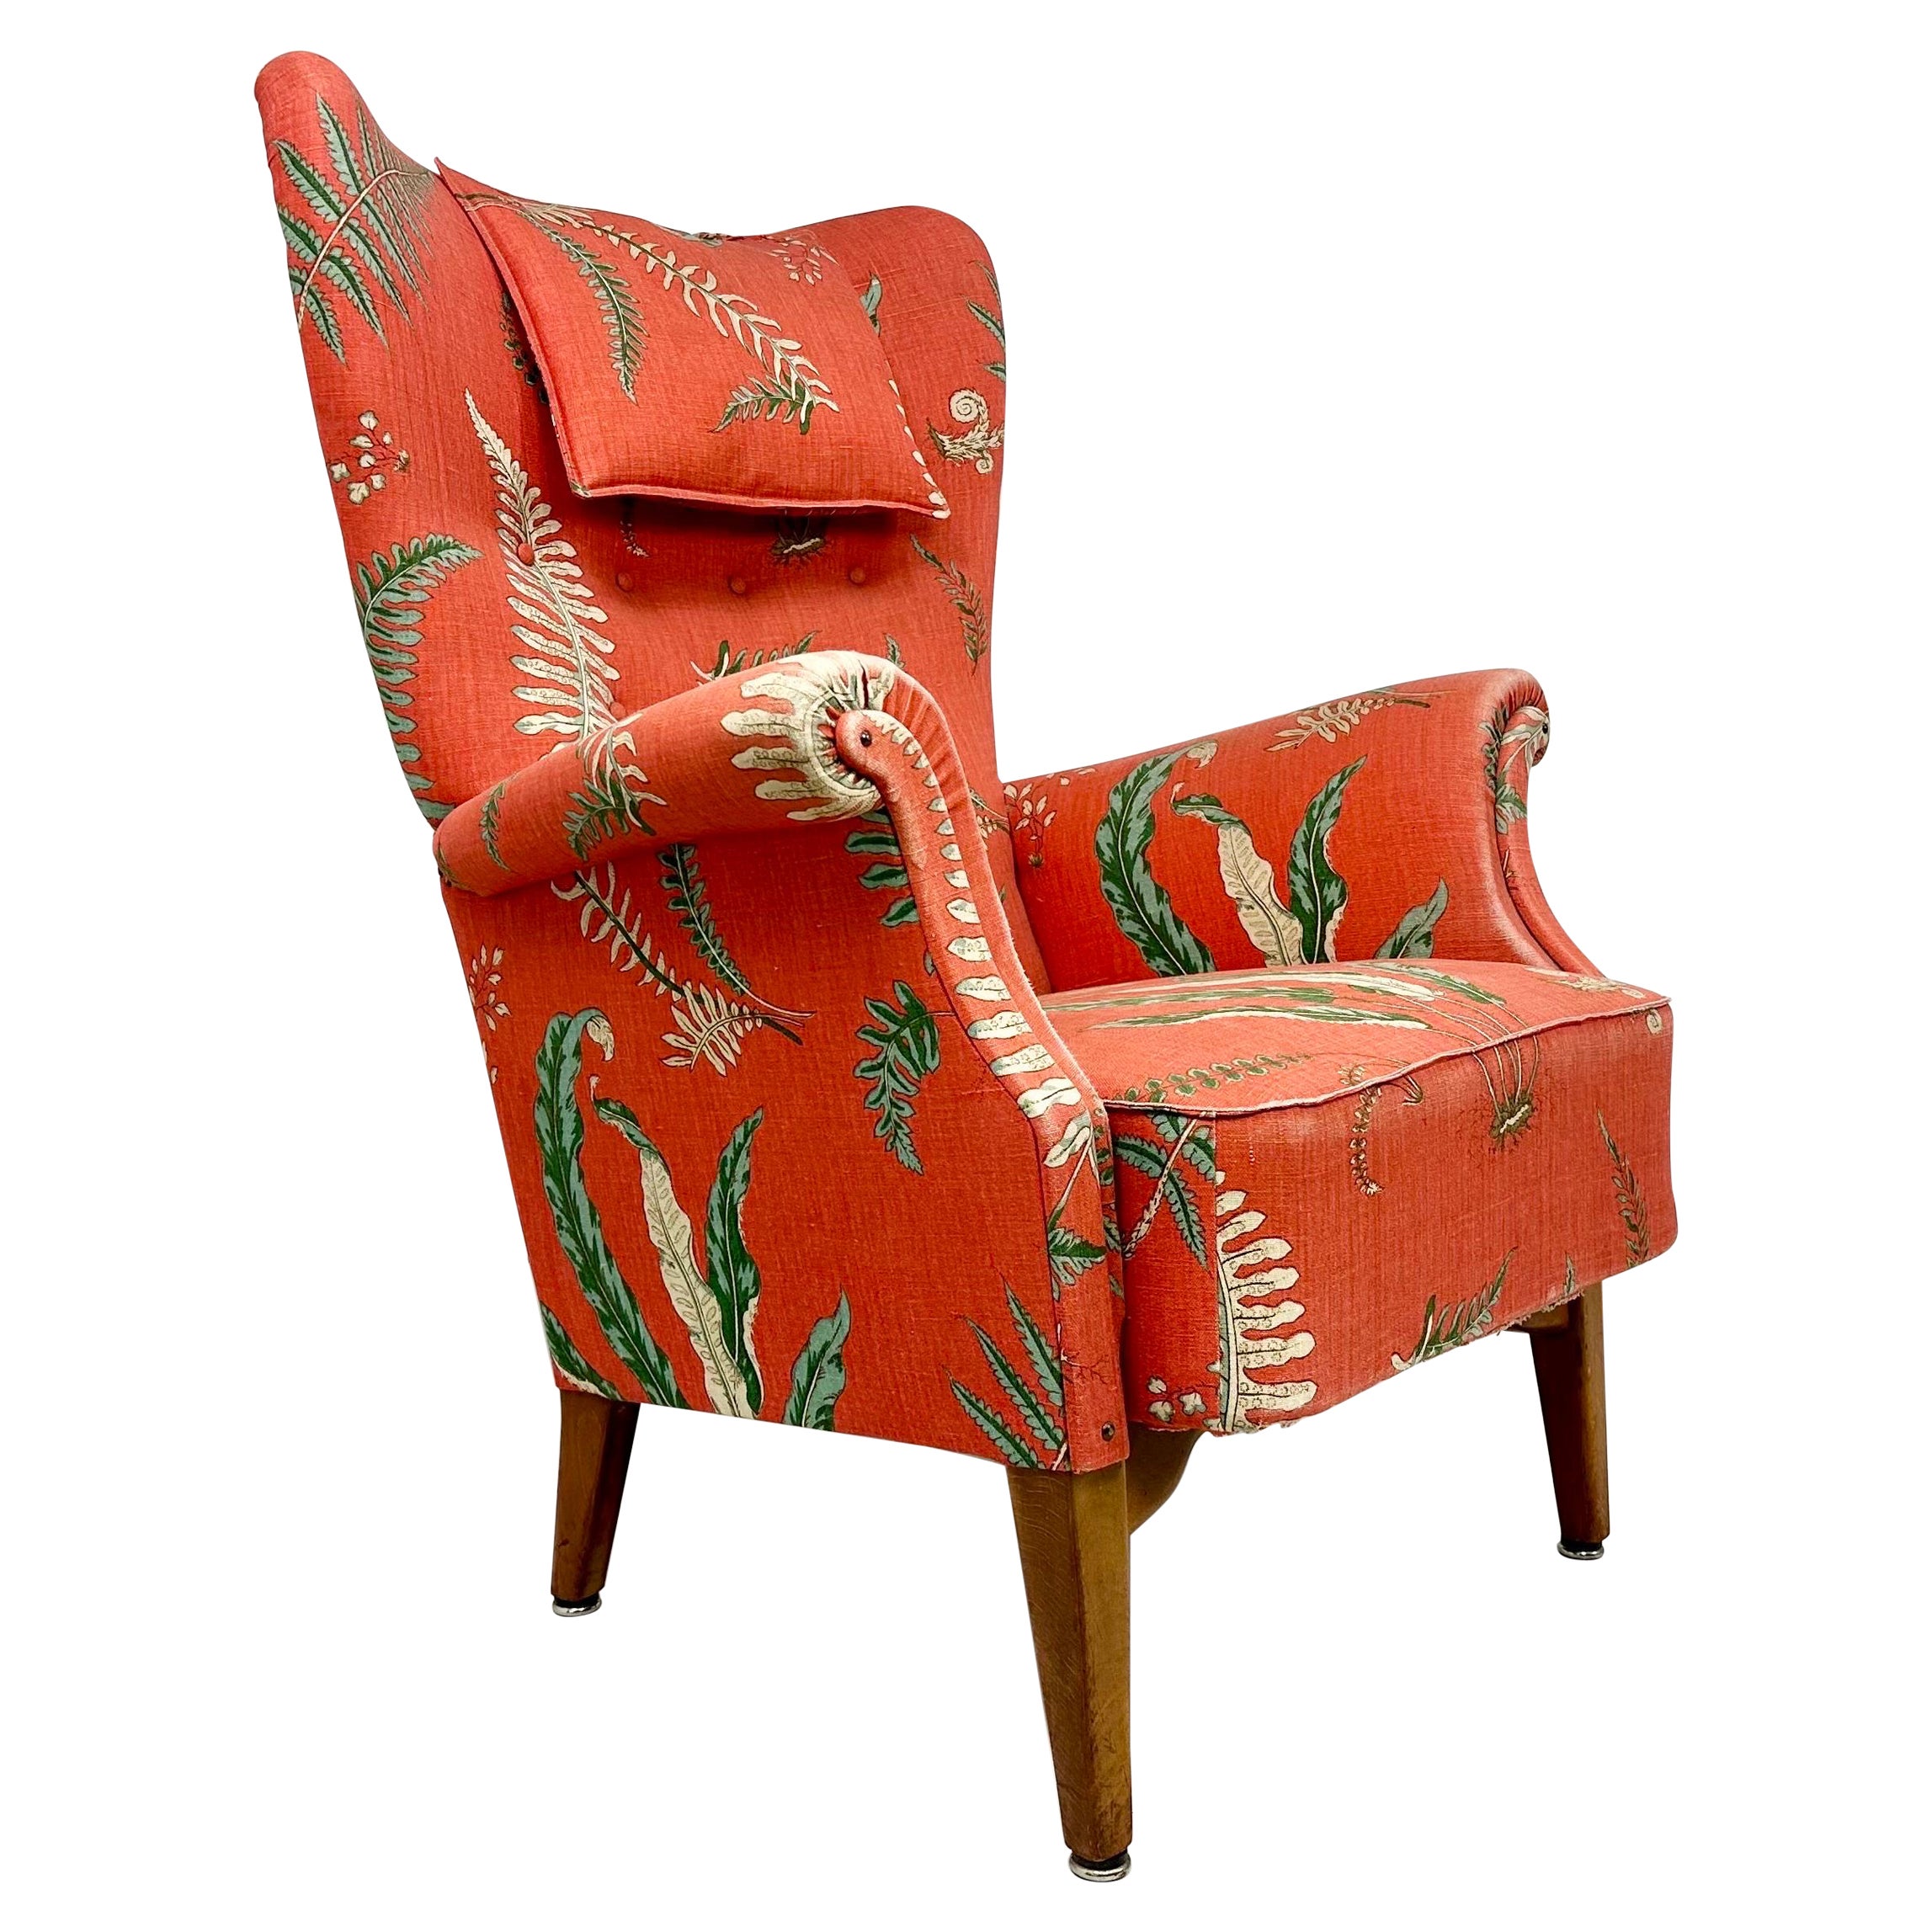 1950’s Dux Lounge Chair With Vintage “Fern” Upholstery For Sale